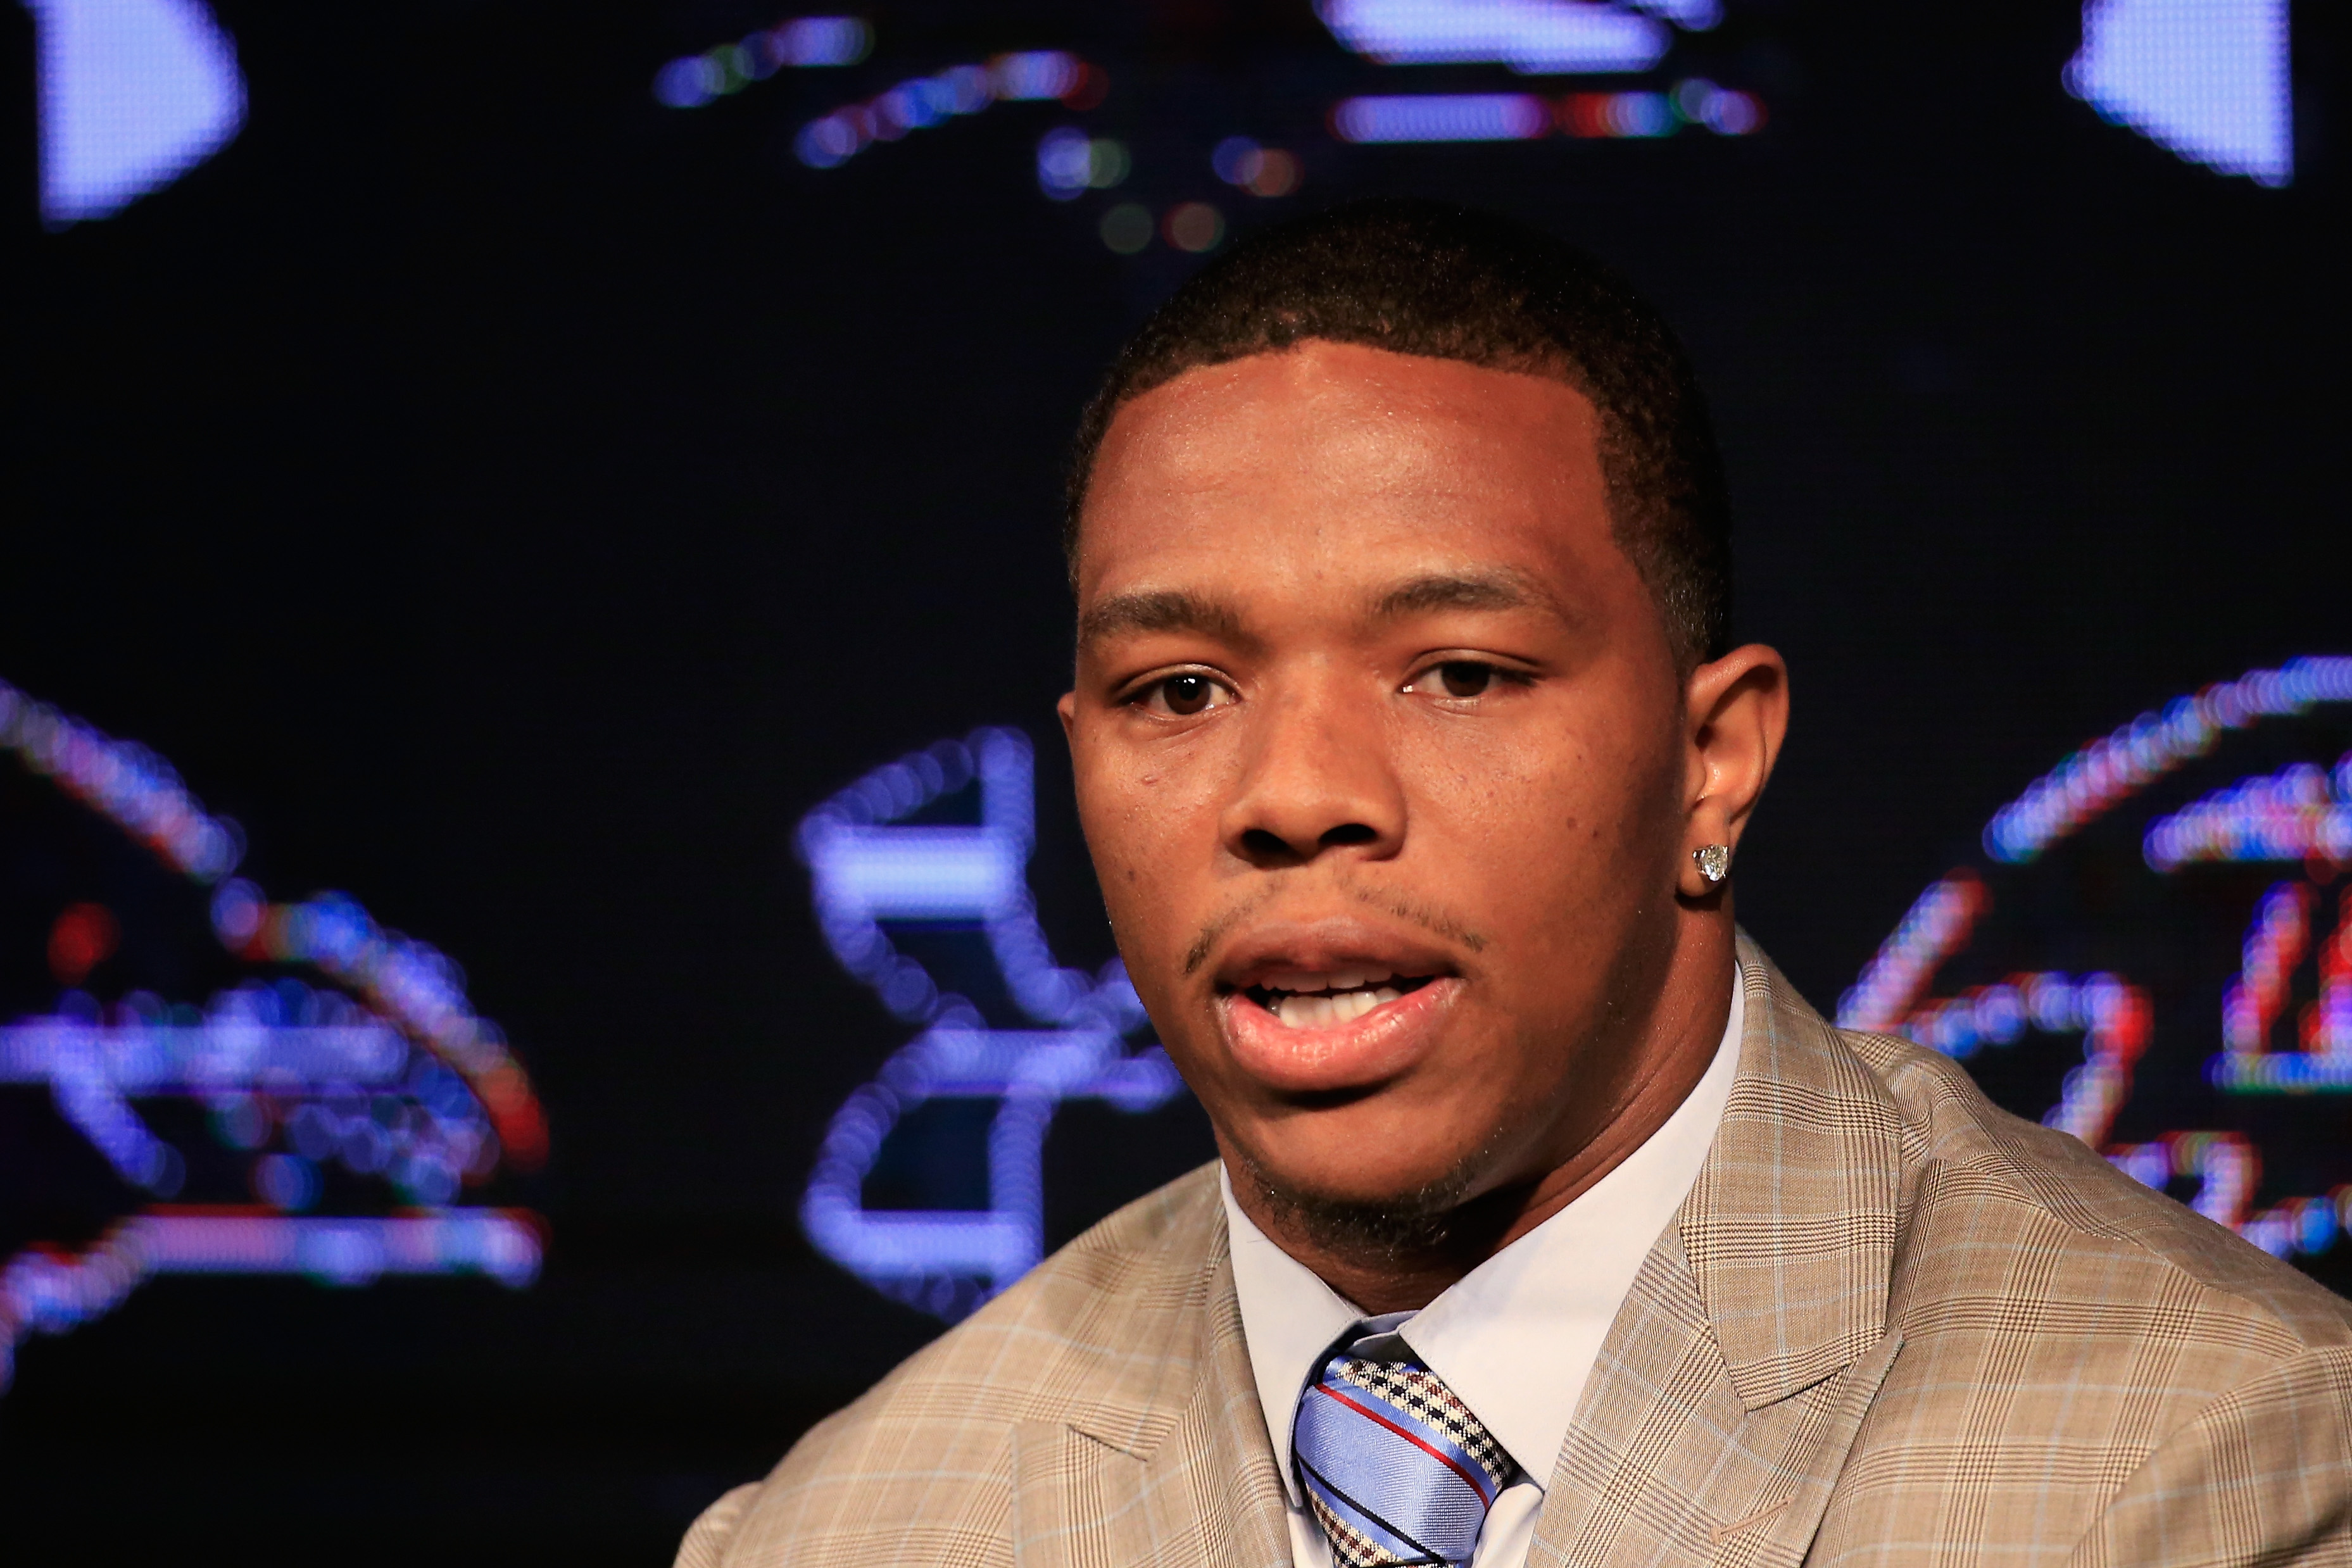 Running back Ray Rice of the Baltimore Ravens addresses a news conference at the Ravens training center on May 23, 2014 in Owings Mills, Maryland. (Rob Carr—Getty Images)